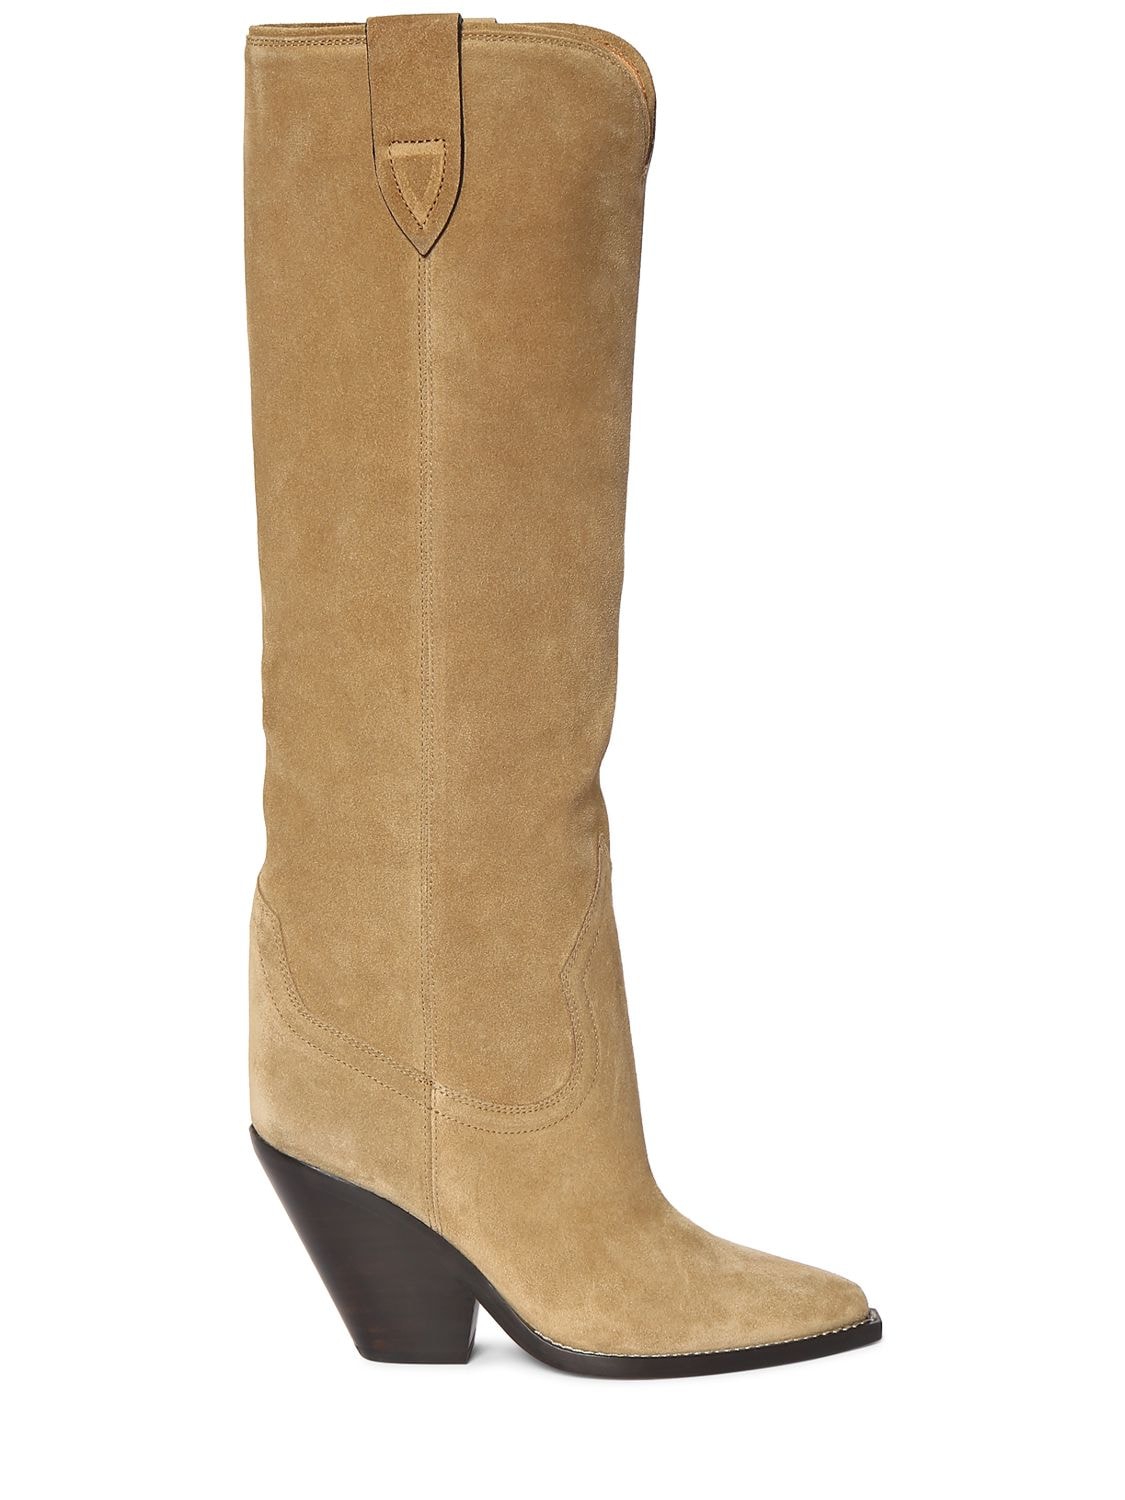 ISABEL MARANT 90mm Lomero-gz Suede Tall Boots